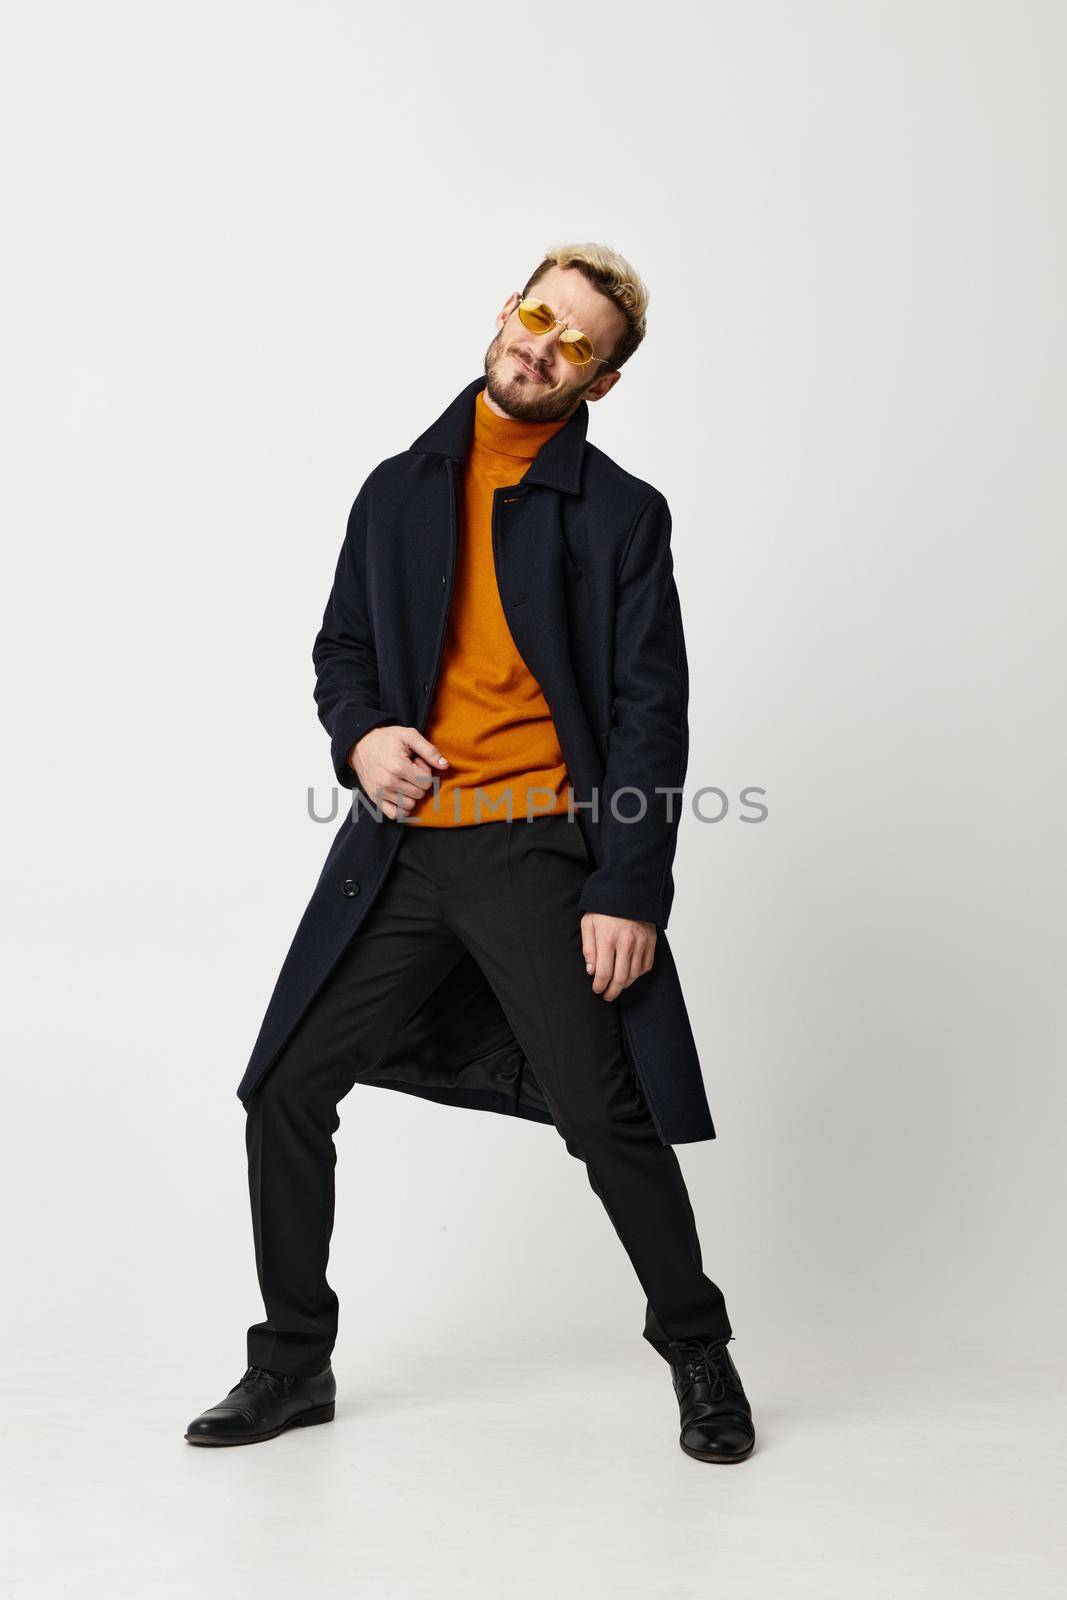 man in a dark coat orange sweater pants model emotions Copy Space. High quality photo